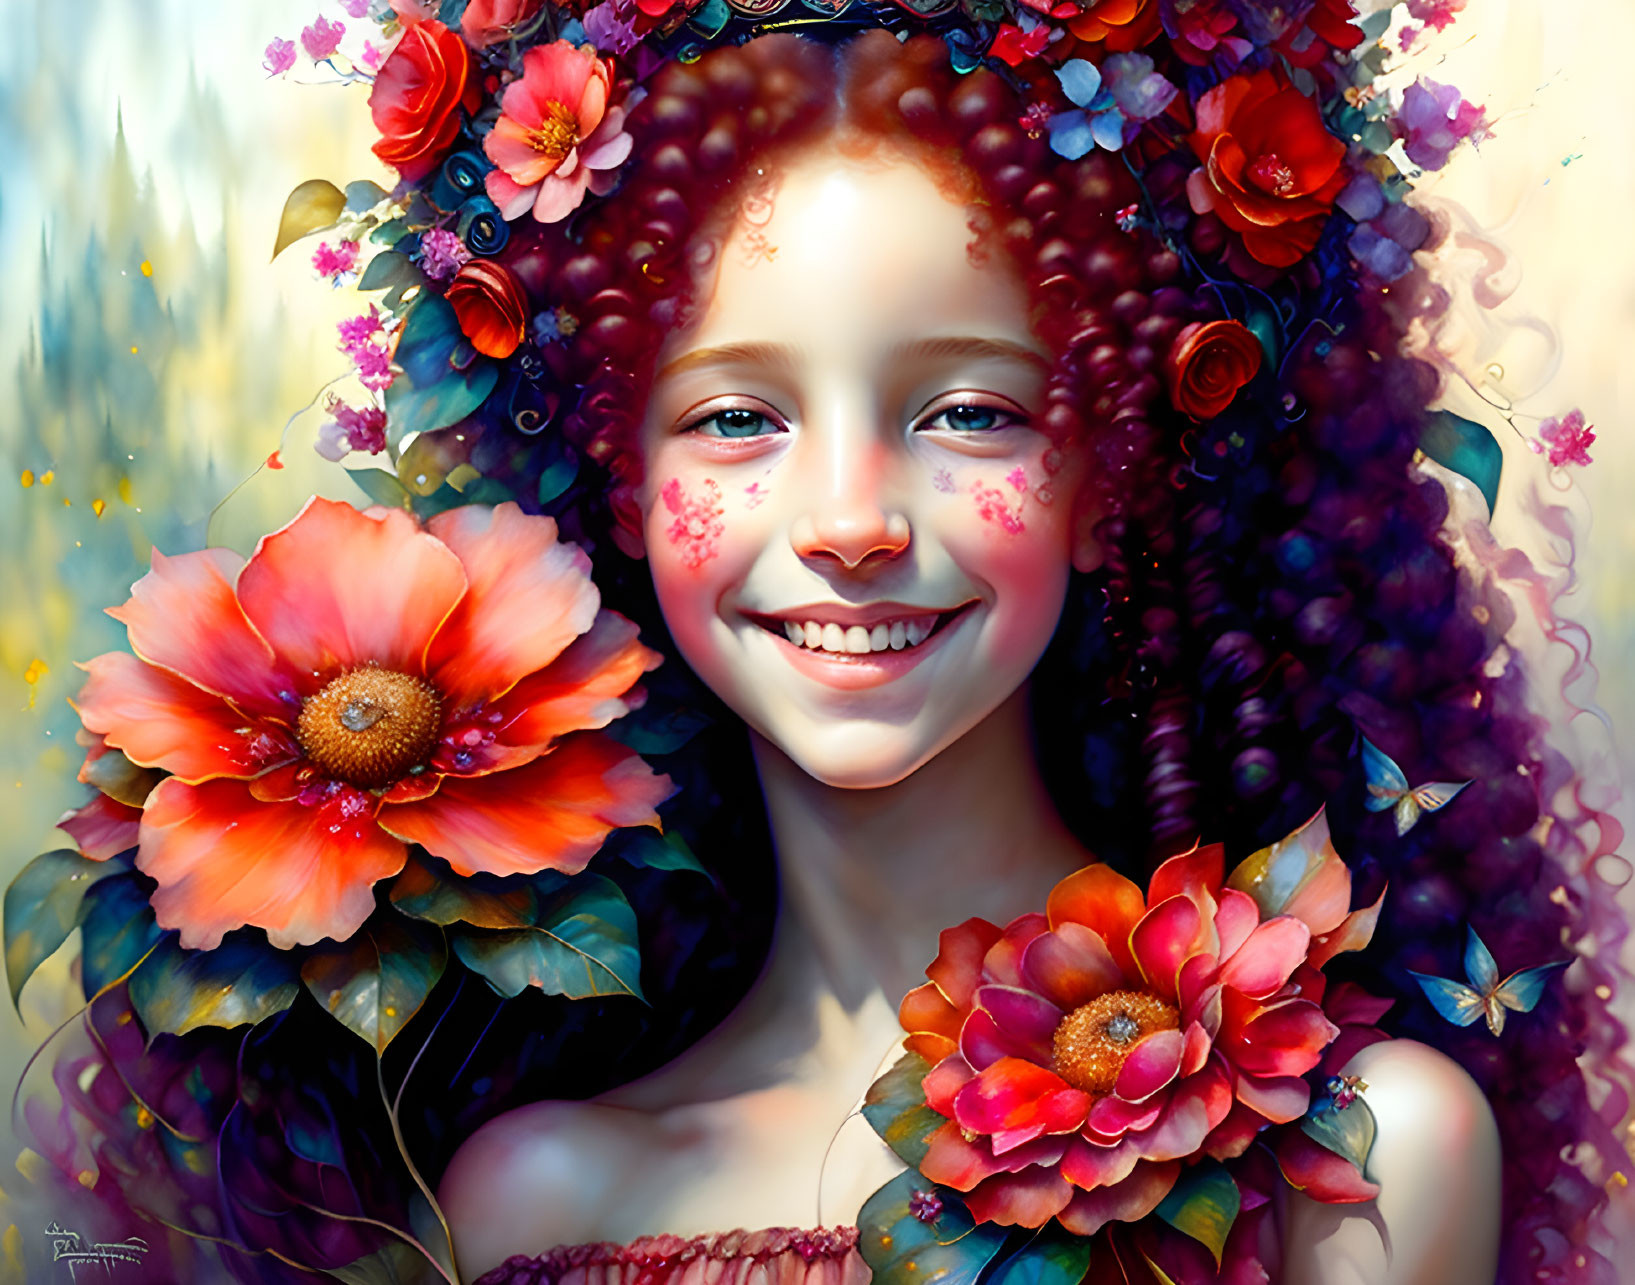 girls with red curly hair, a crown of flowers on t